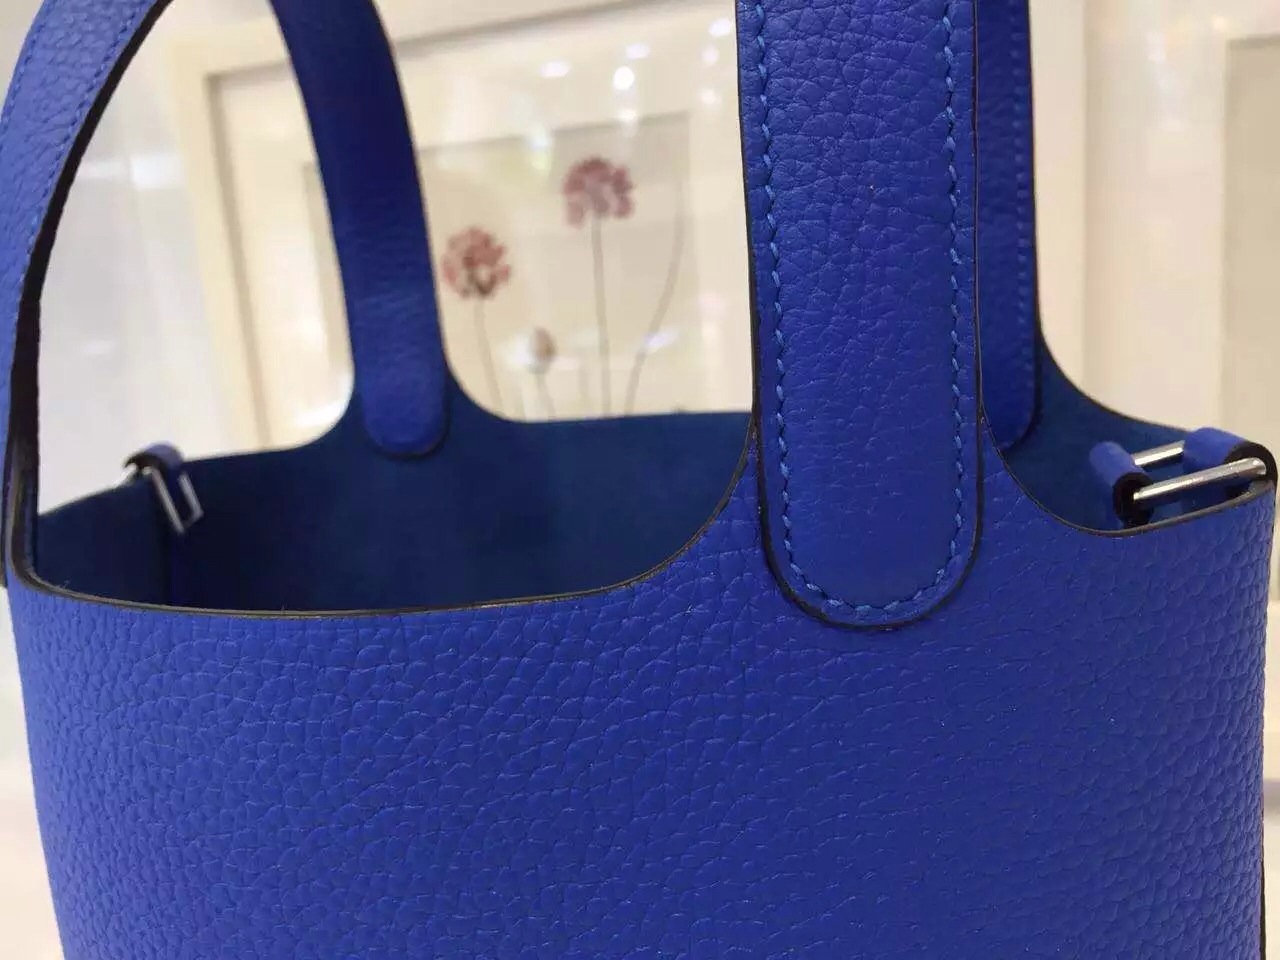 On Sale Hermes France Togo Leather Picotin Lock Bag in T7 Blue Hydra Two Size